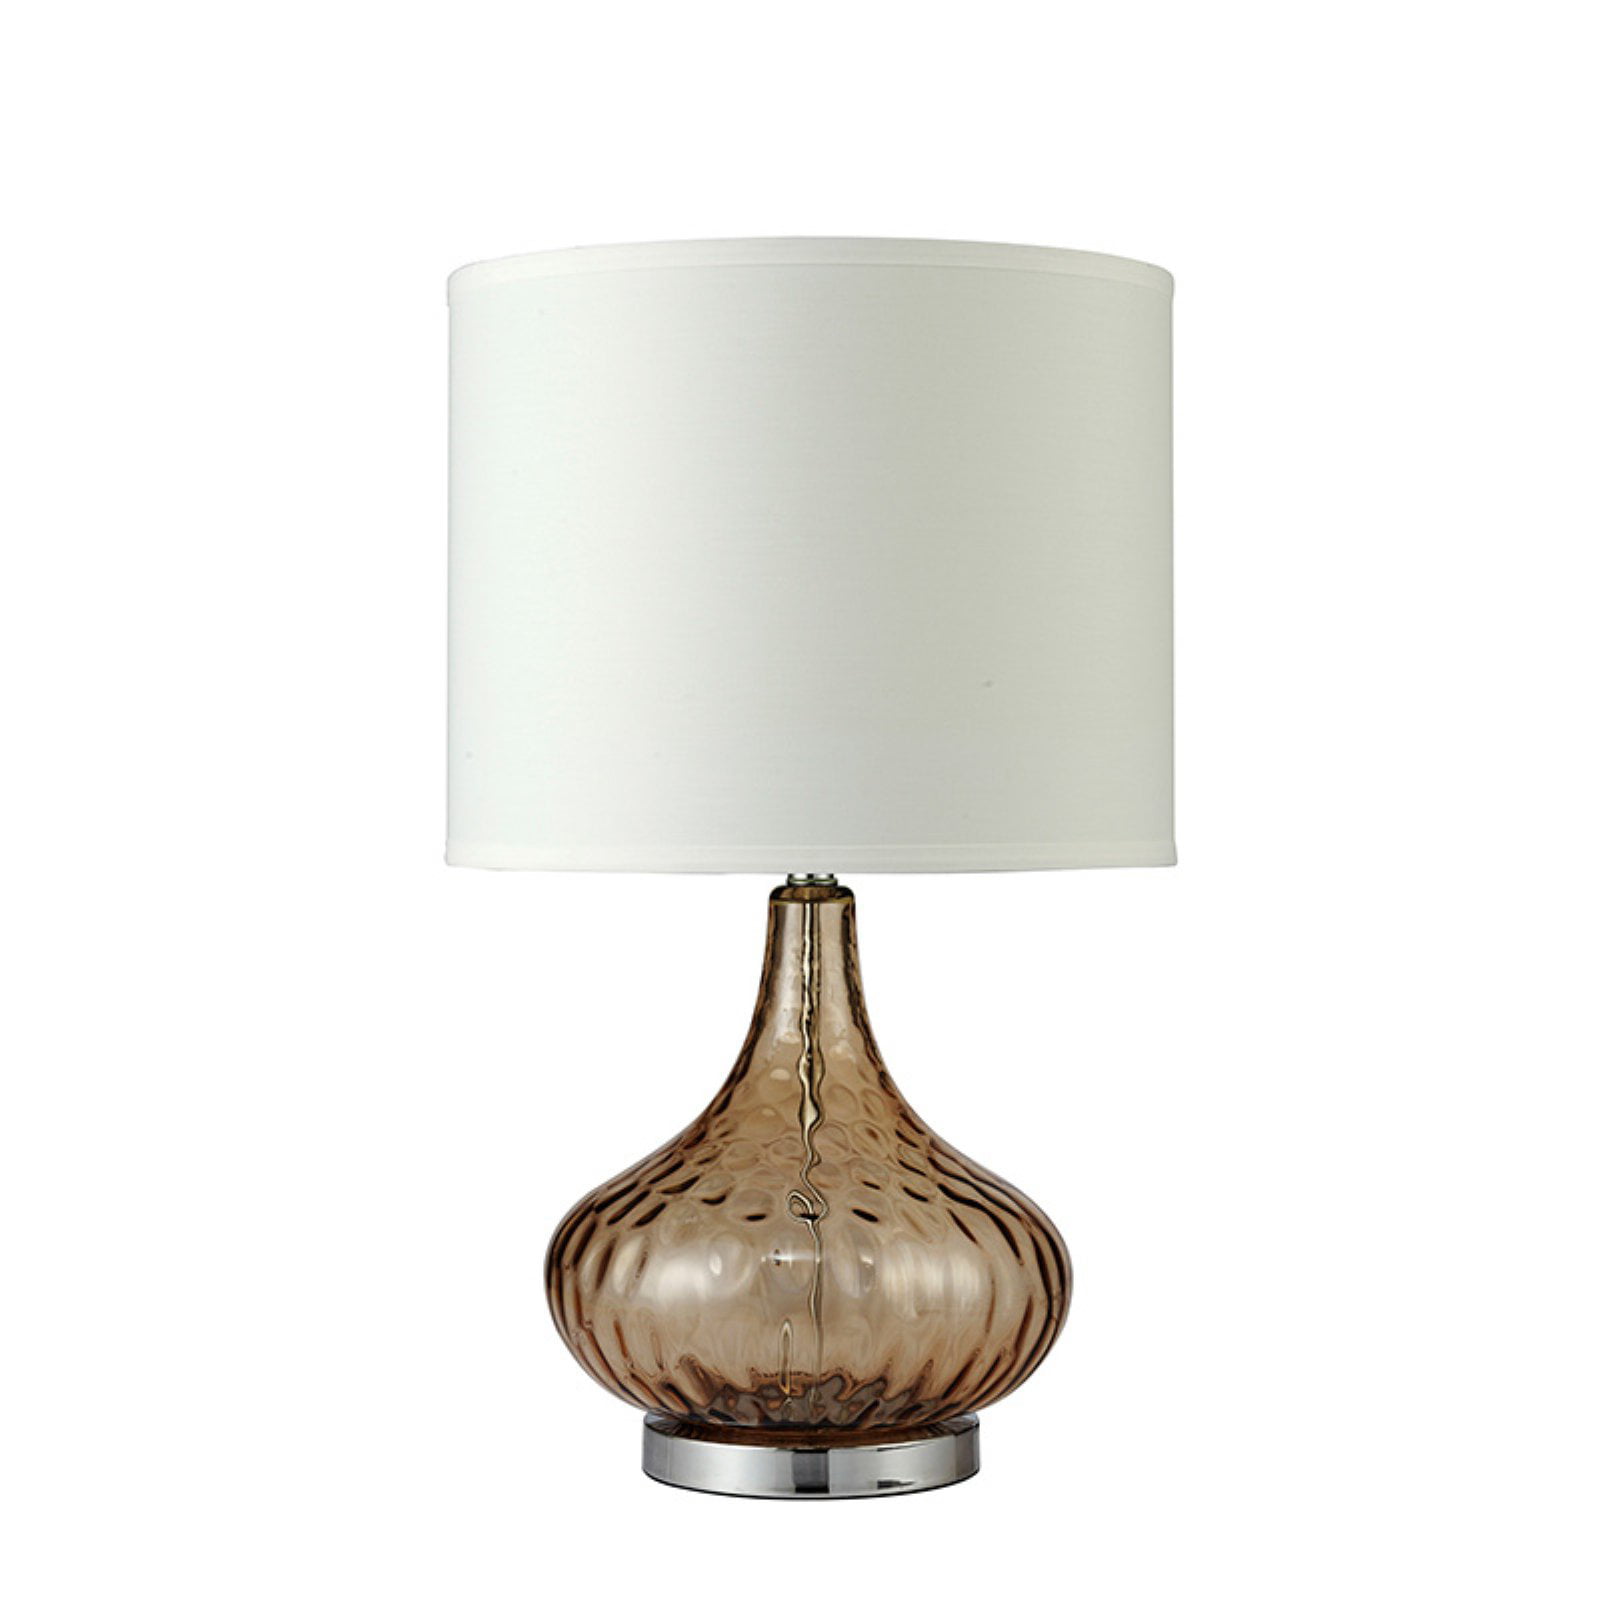 Courtney Fluted Amber Glass Table Lamp, Courtney 24 Table Lamp Set